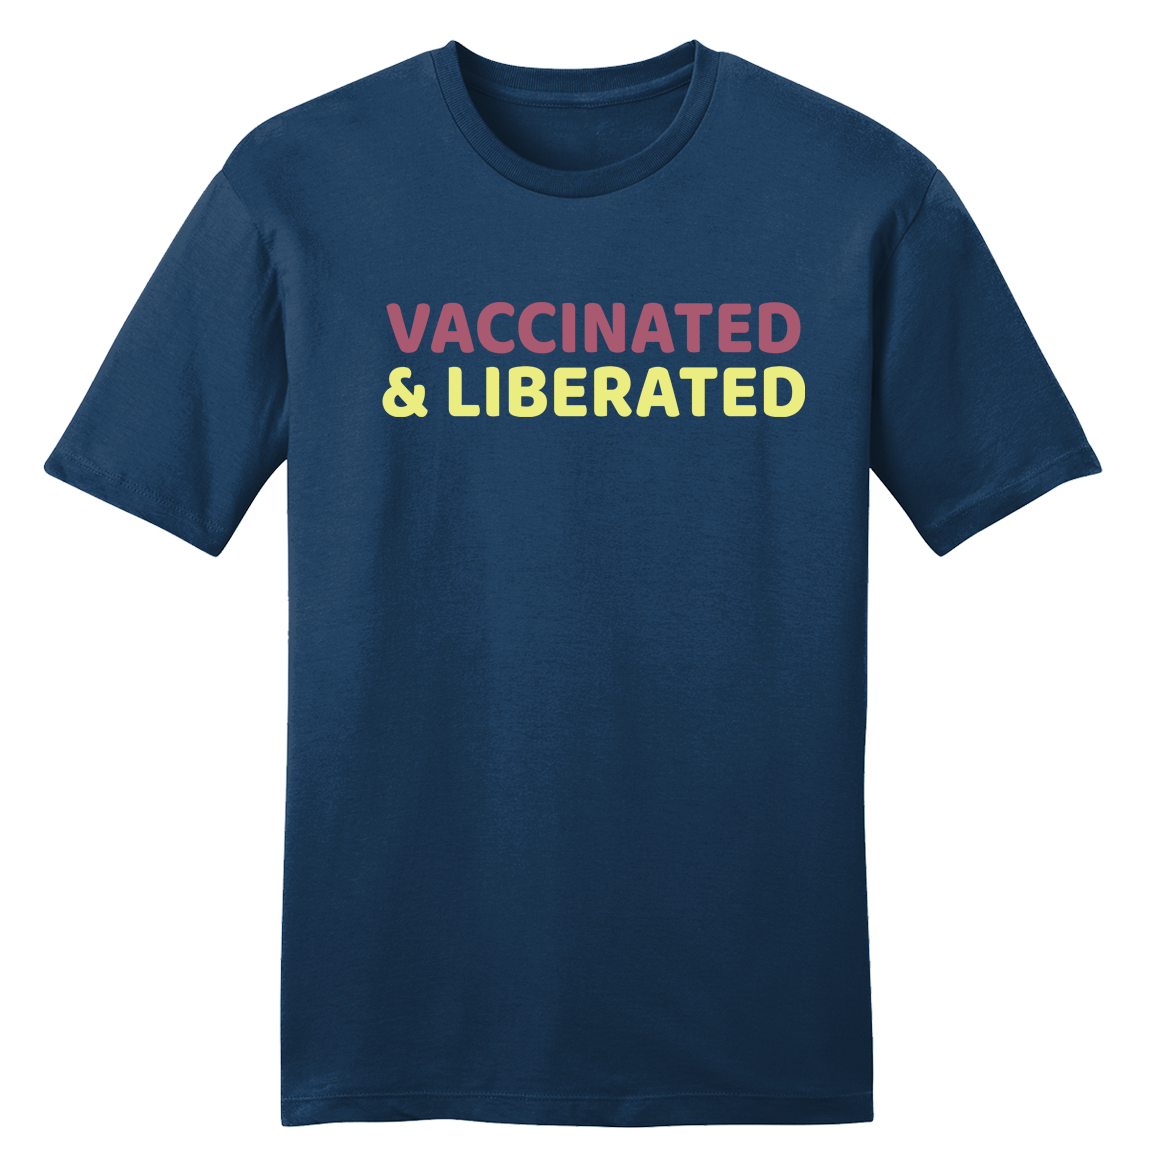 Vaccinated and Liberated - Cincy Shirts